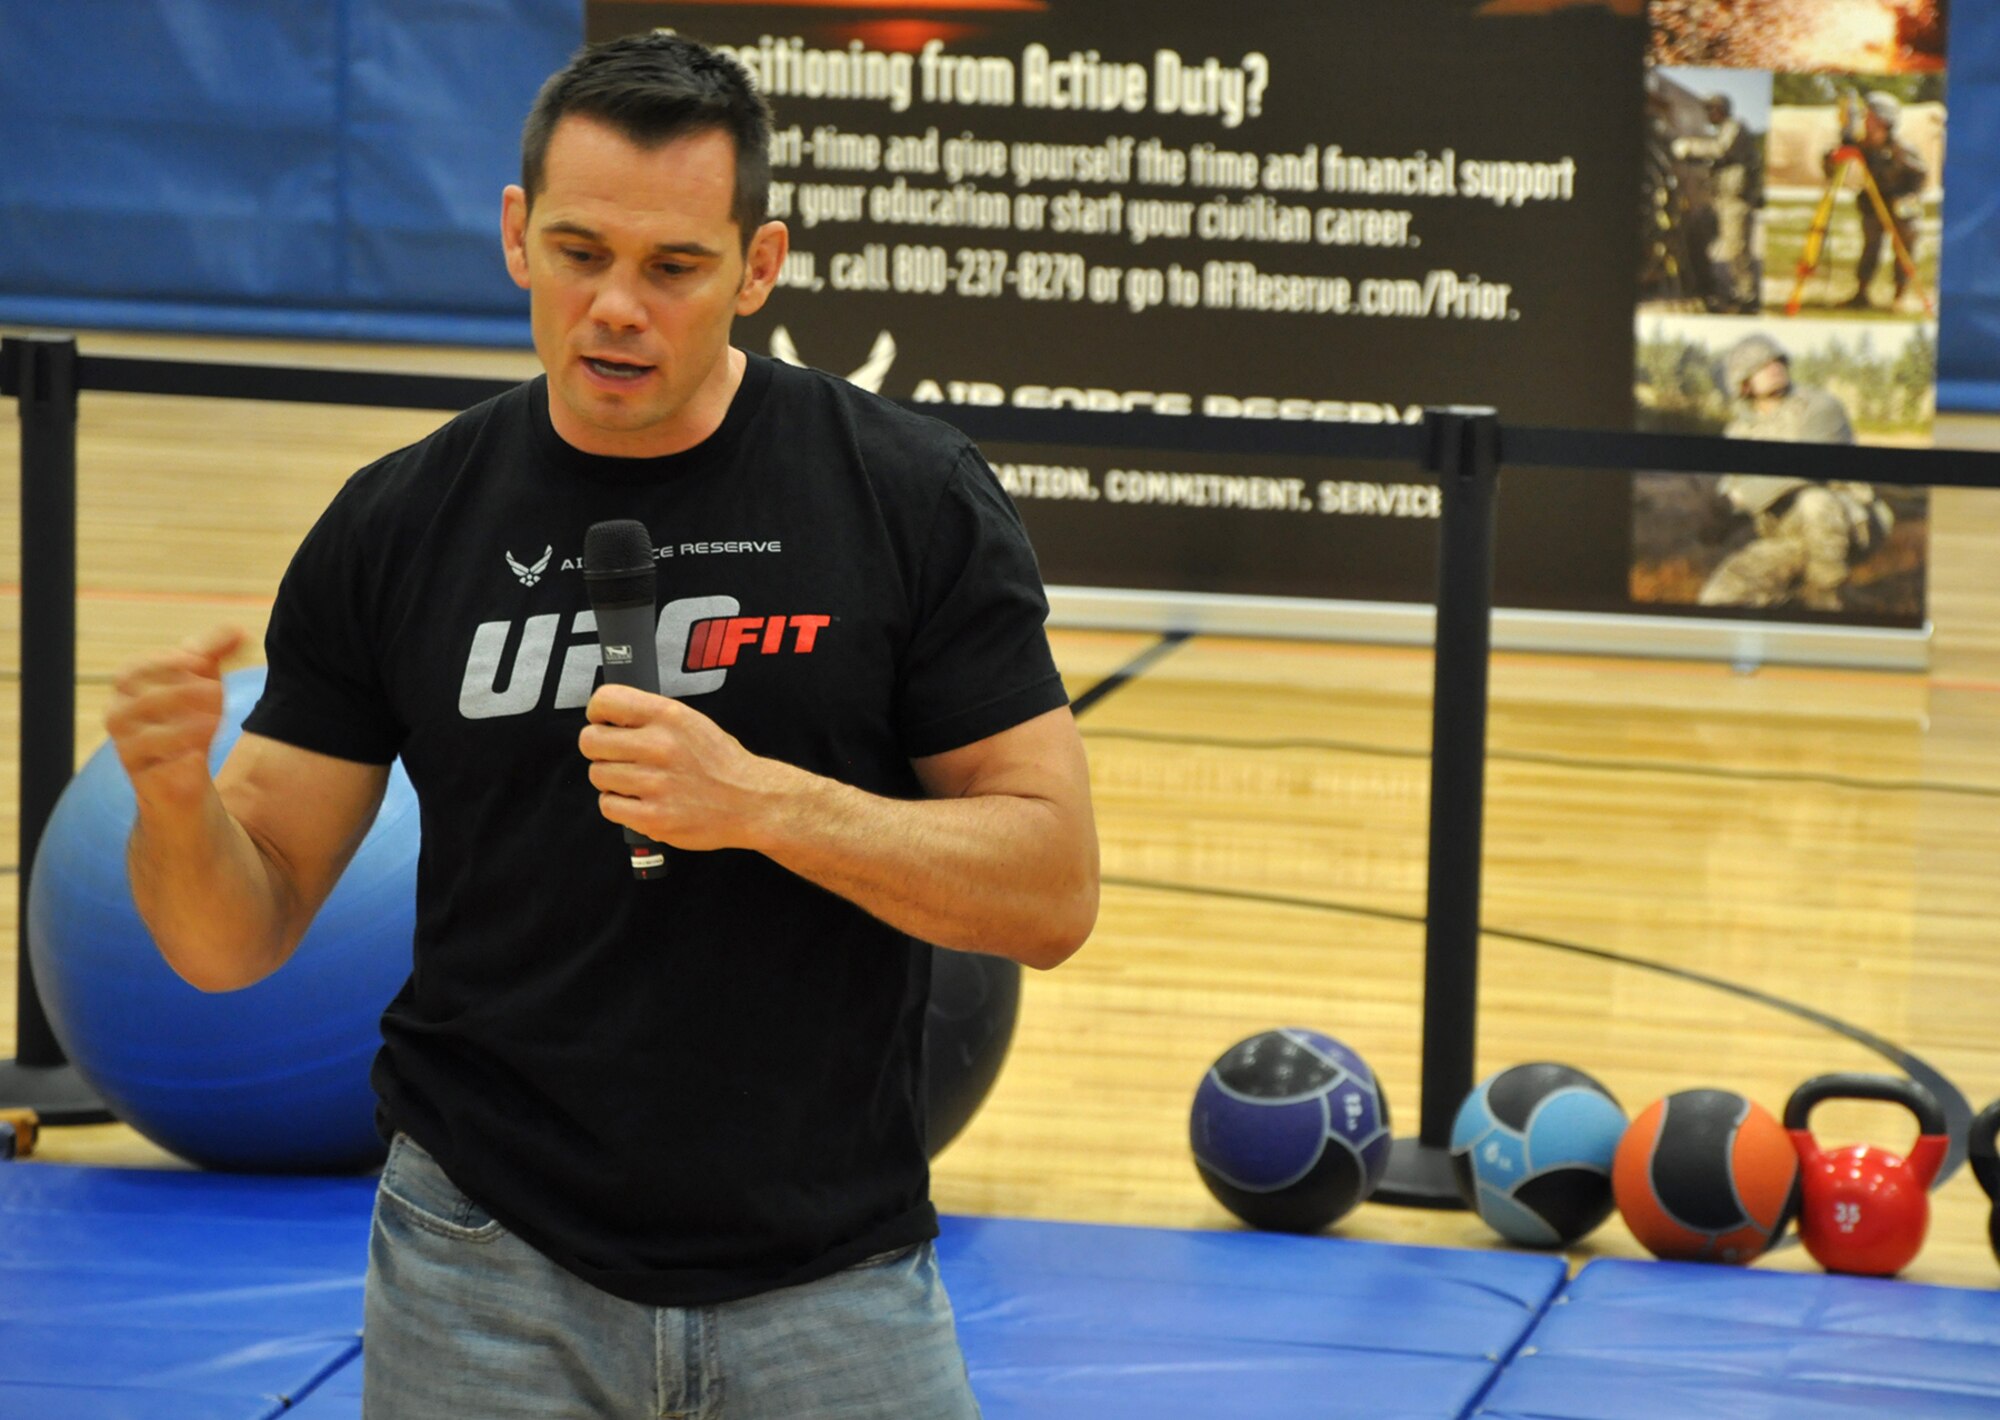 UFC Middleweight Champion Rich Franklin emphasizes the importance of eating foods that are minimally processed during a fitness workshop at Wilson Fitness Center at Lewis North May 3. The event, sponsored by Air Force Reserve Recruiting, was incorporated into this year’s Ultimate Fighting Champion Fit Tour. (U.S. Air Force Reserve photo by Tech. Sgt. Minnette Mason)